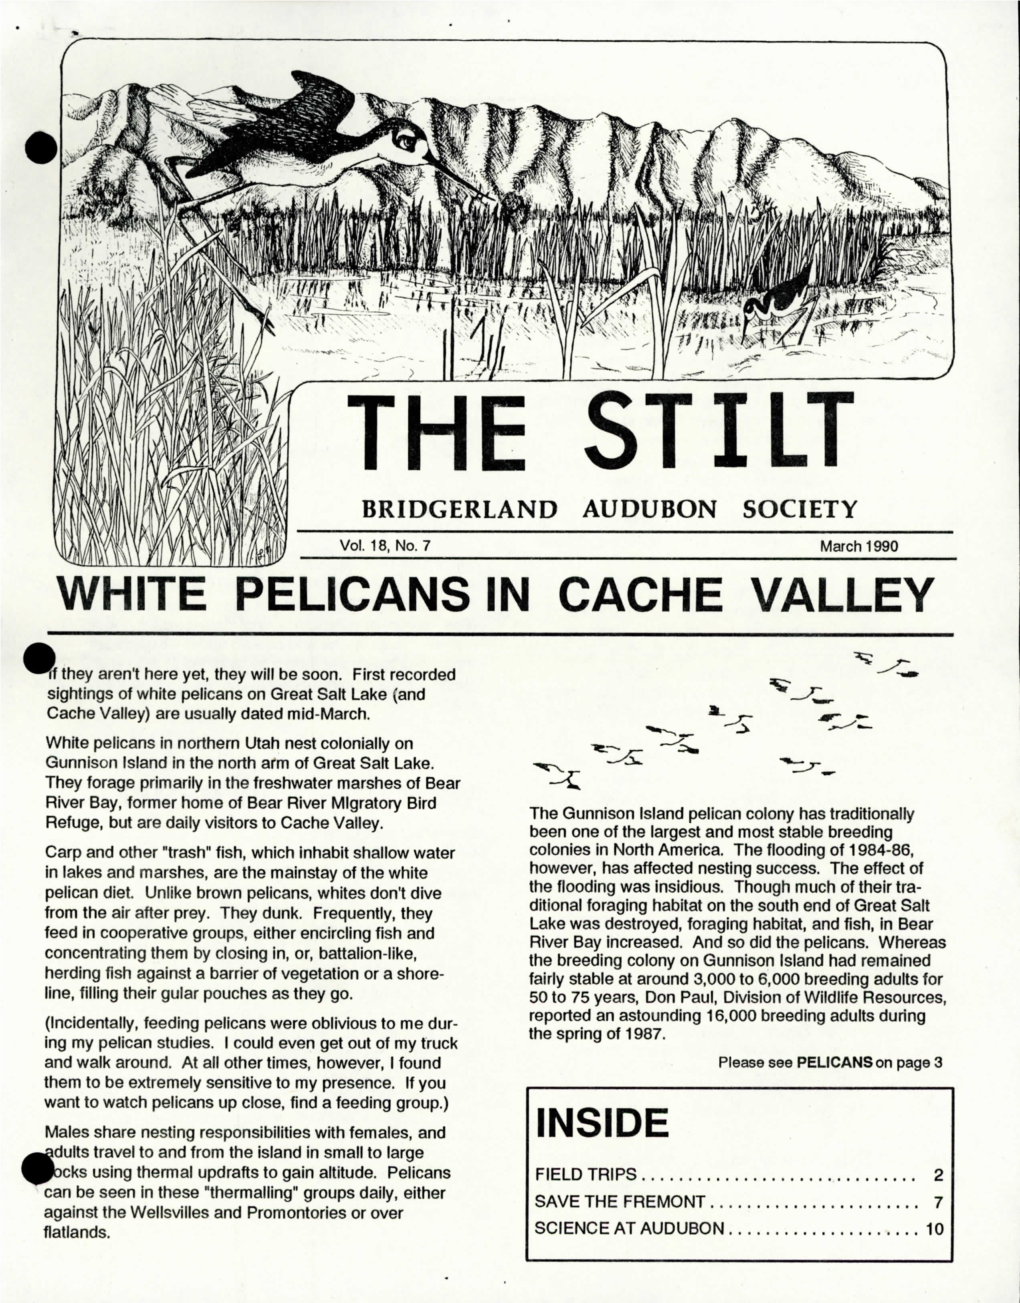 White Pelicans in Cache Valley